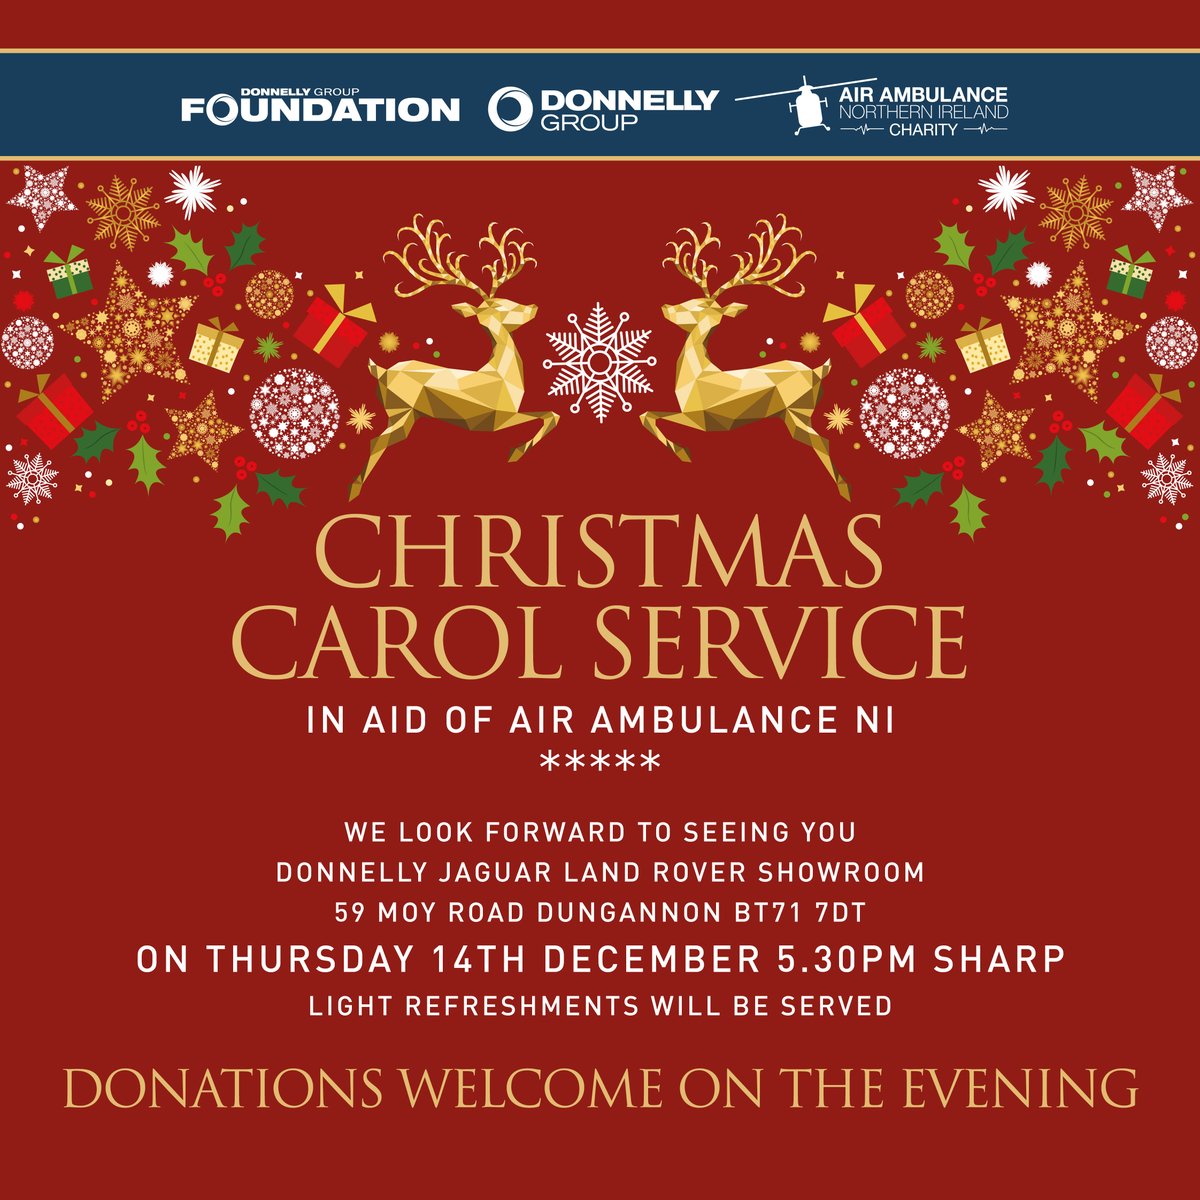 SAVE THE DATE! Thursday 14th December, 5.30pm Donnelly Group is bringing some festive cheer to Dungannon with an open invite to our Christmas Carol Service, featuring our staff choir, on Thursday 14th December at 5:30pm in aid of our Charity Partner, @AirAmbulanceNI.